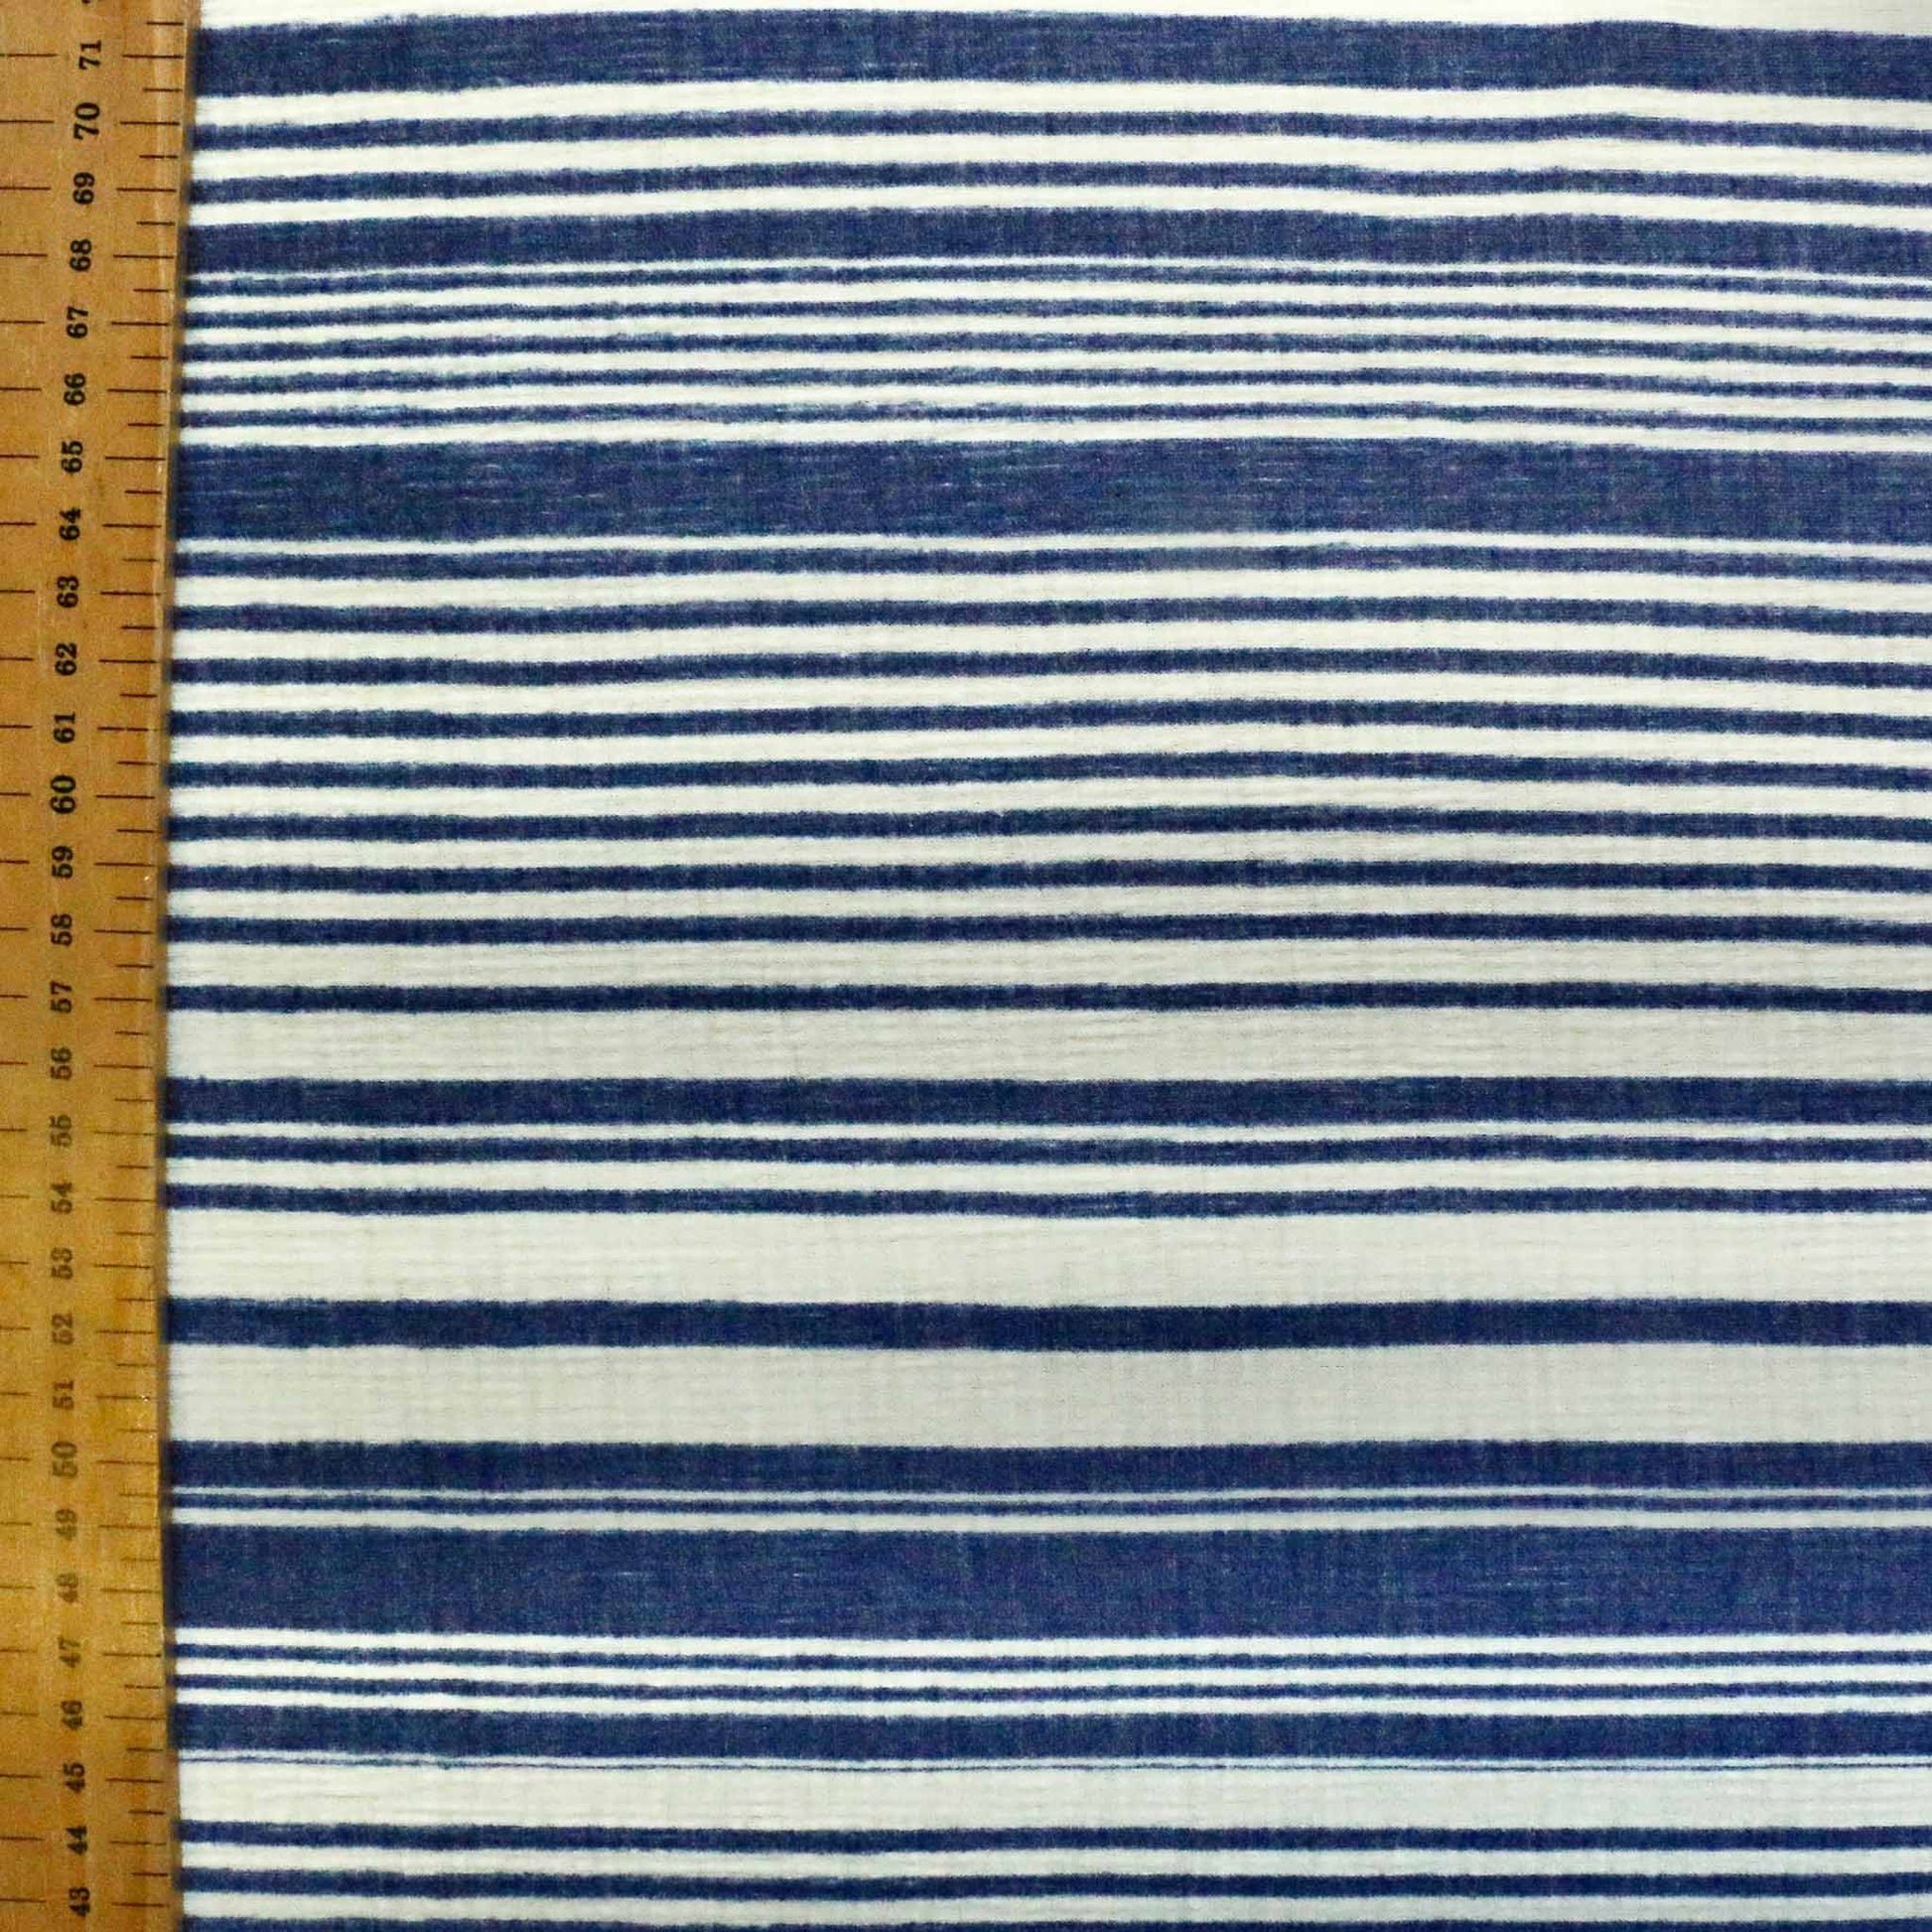 metre stretchy jersey knit viscose dressmaking fabric in blue and white with striped pattern